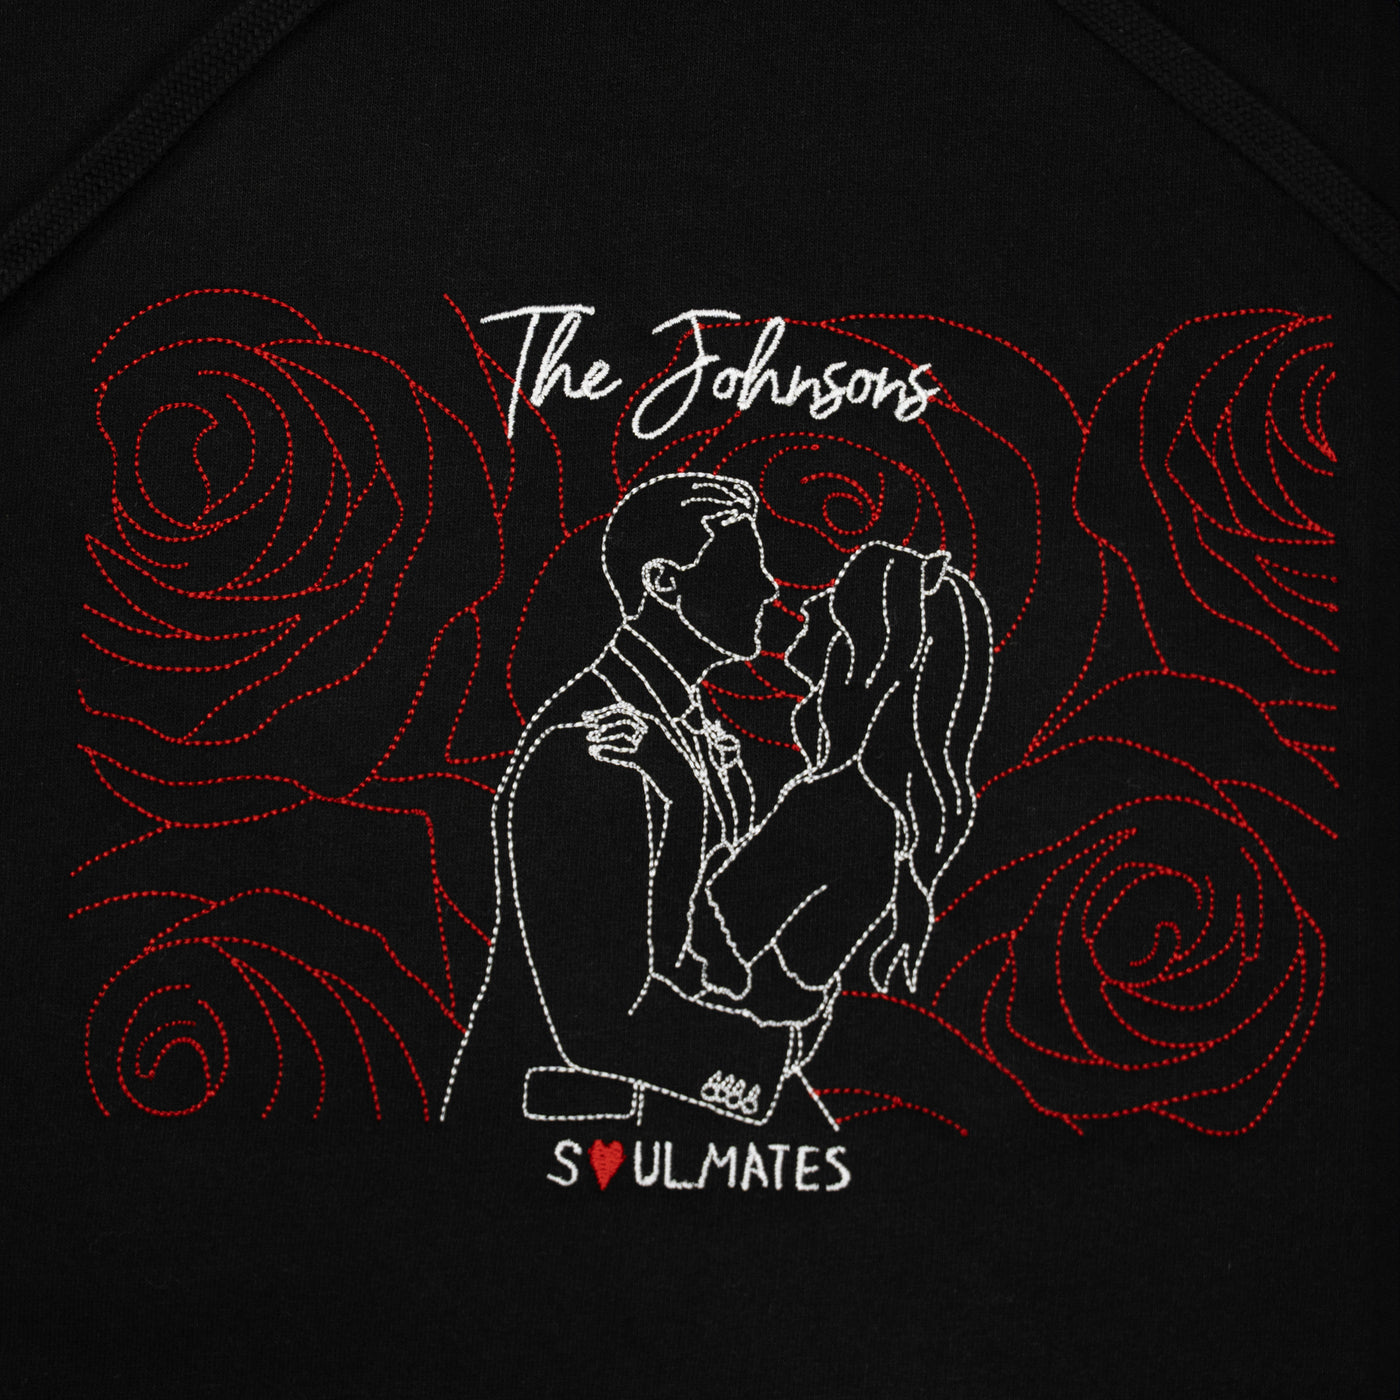 Couple embroidery "The Johnsons"